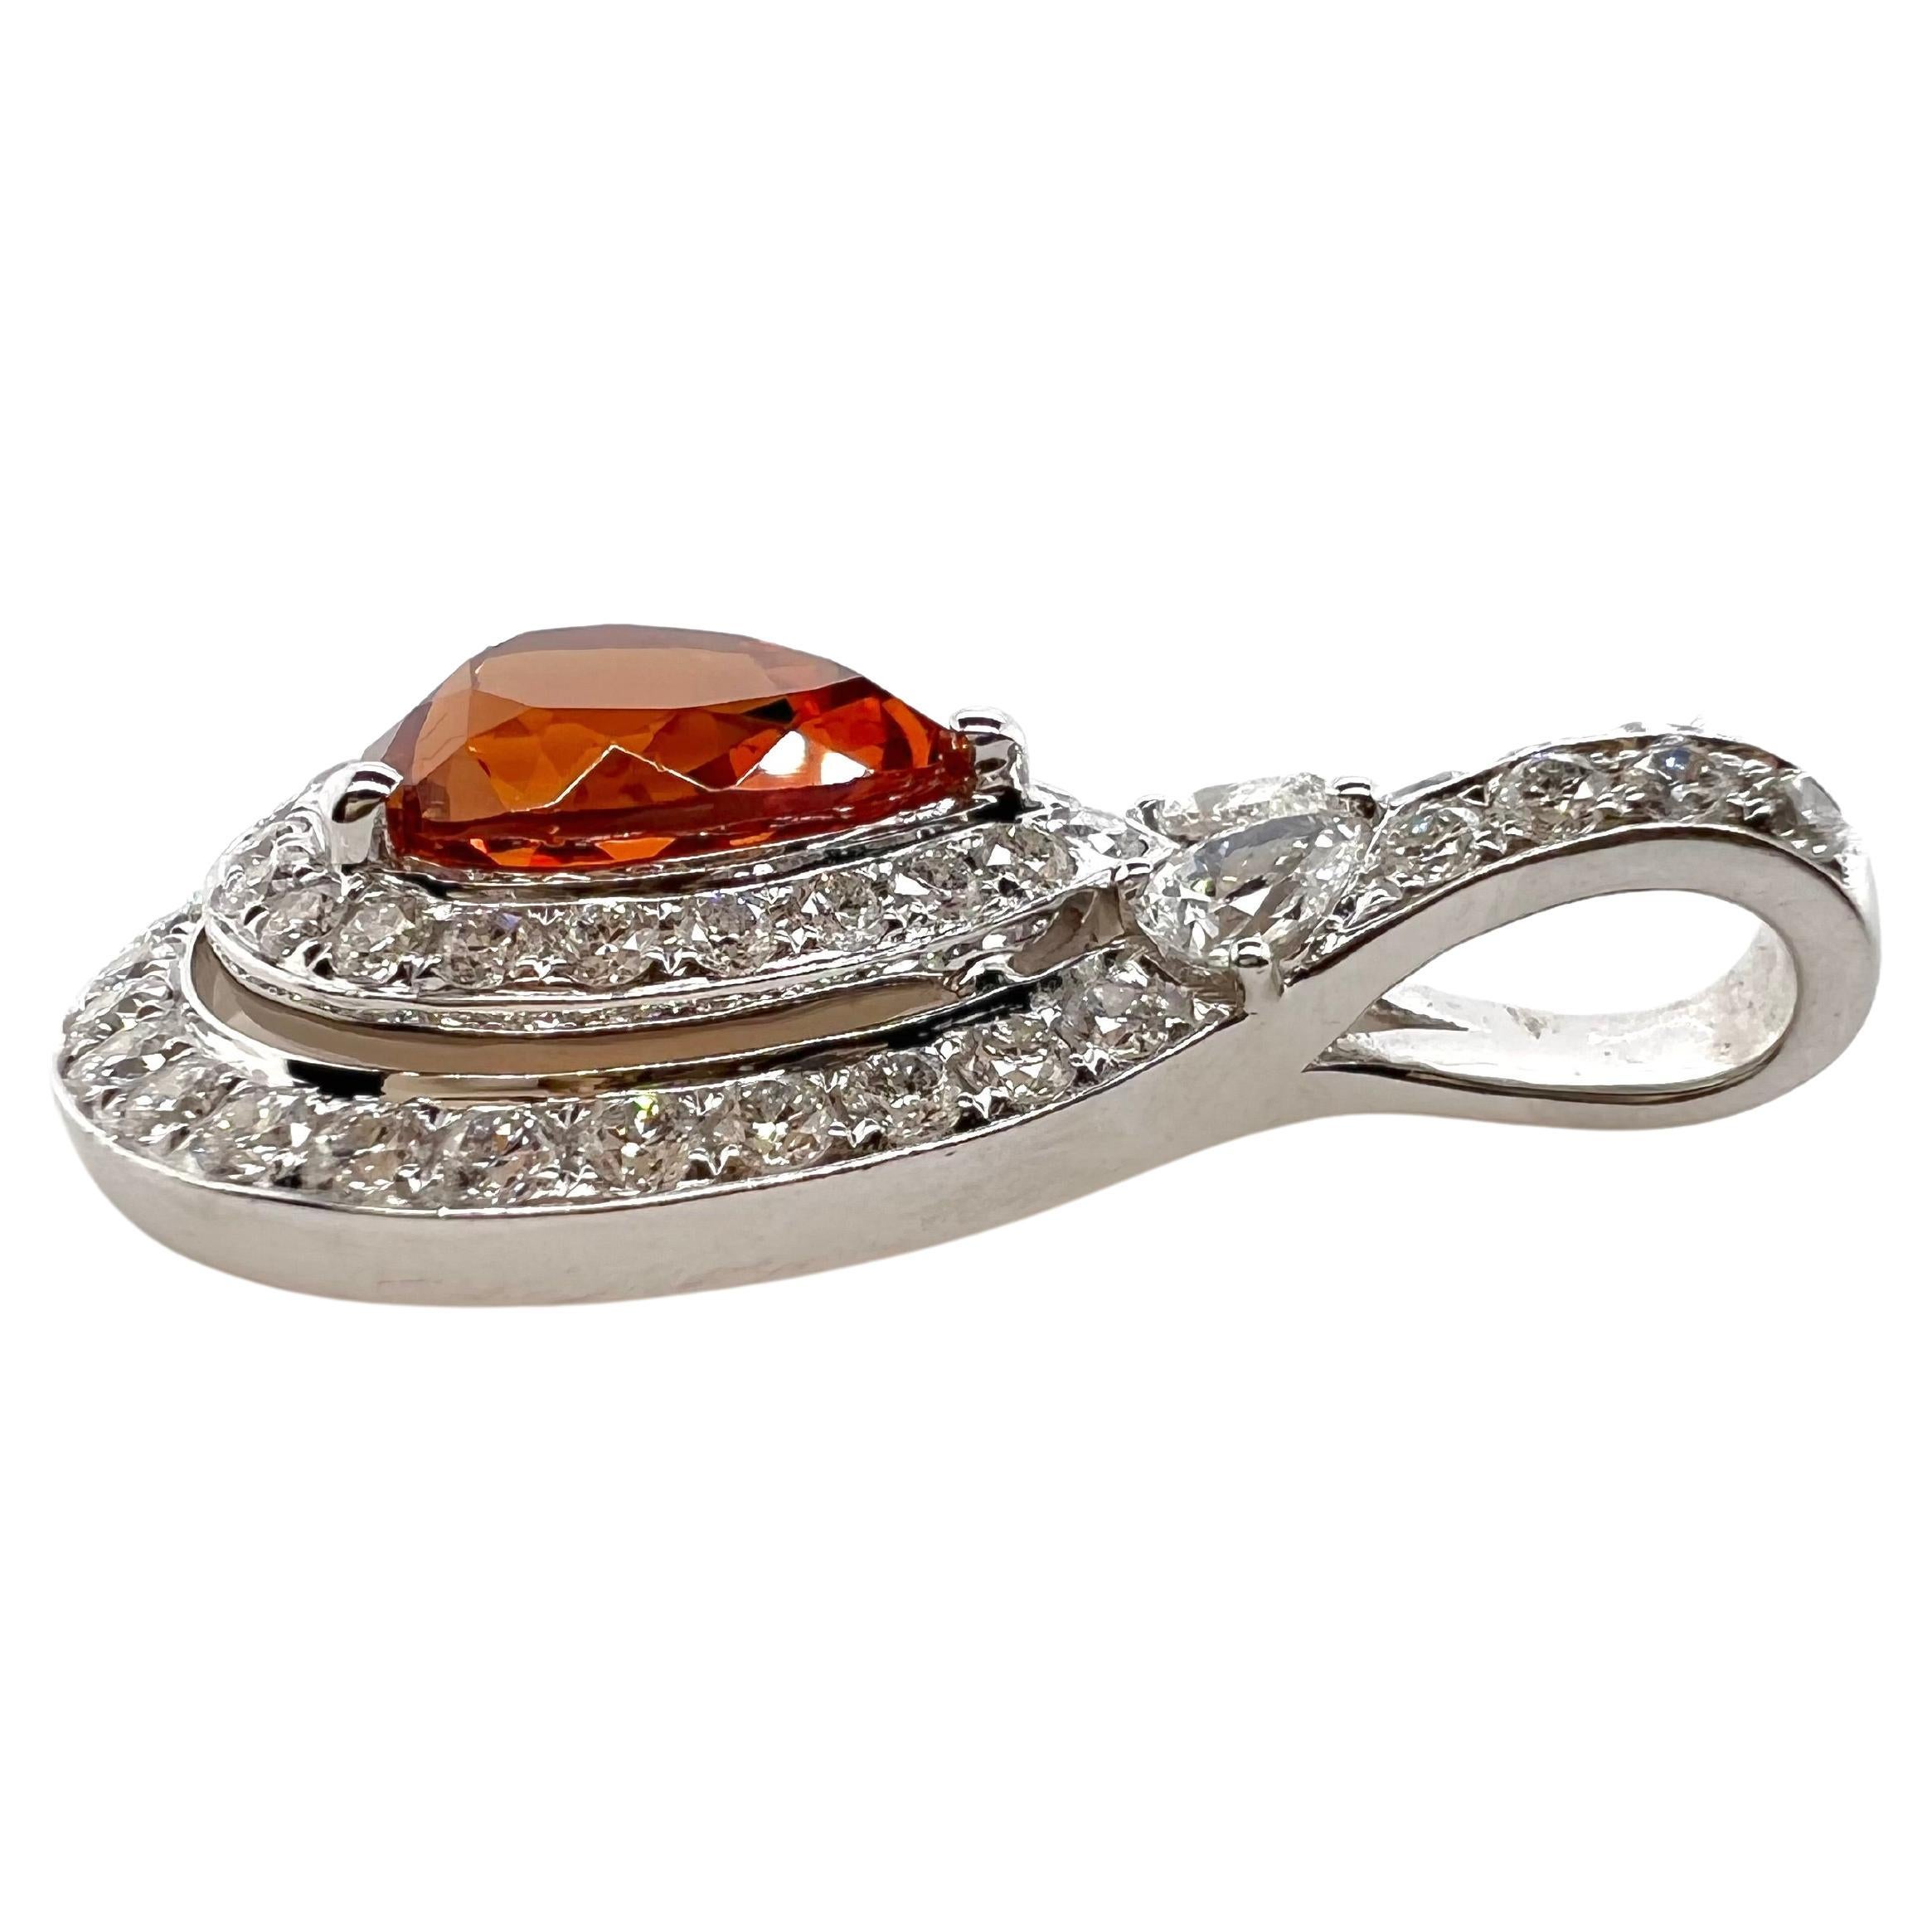 Absolutely gorgeous!  The pear shaped mandarin garnet has so much fire and is contrasted by the bright diamonds on the setting in the 18k white mounting.  The pear shape design truly accentuates the beautiful garnet!.


Stone: Mandarin Garnet 3.55